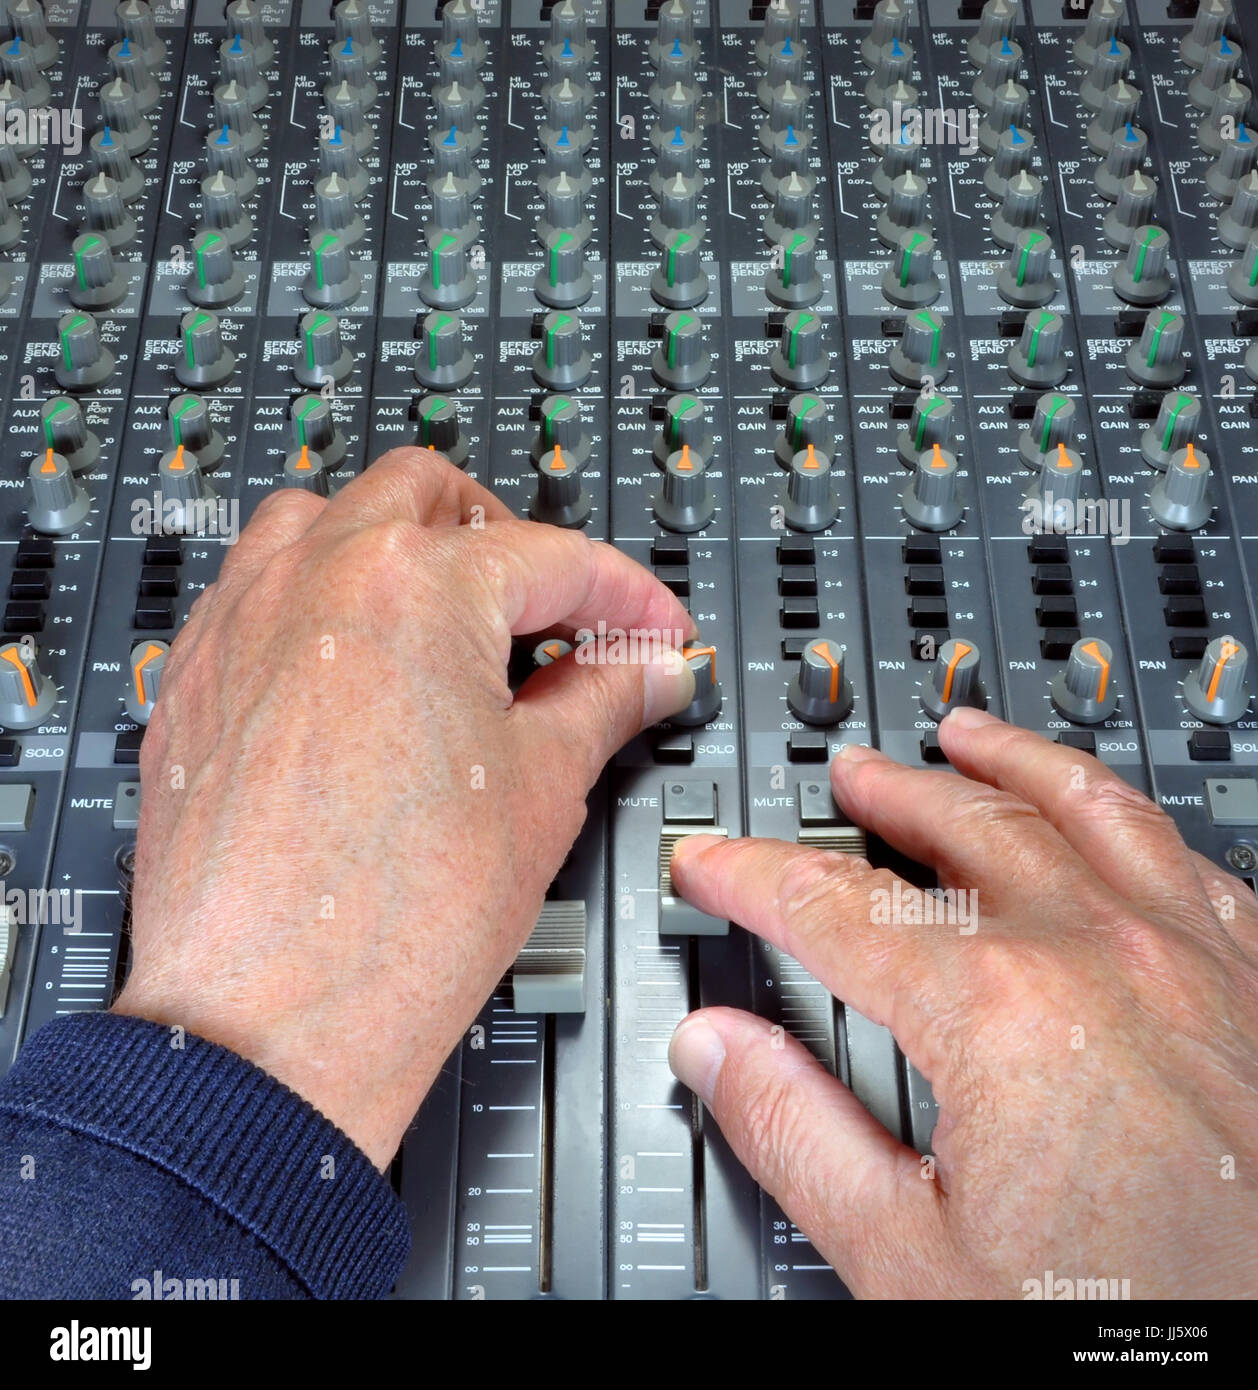 Experienced hands operating the faders, buttons and knobs on an analogue music mixing and recording desk in a studio Stock Photo